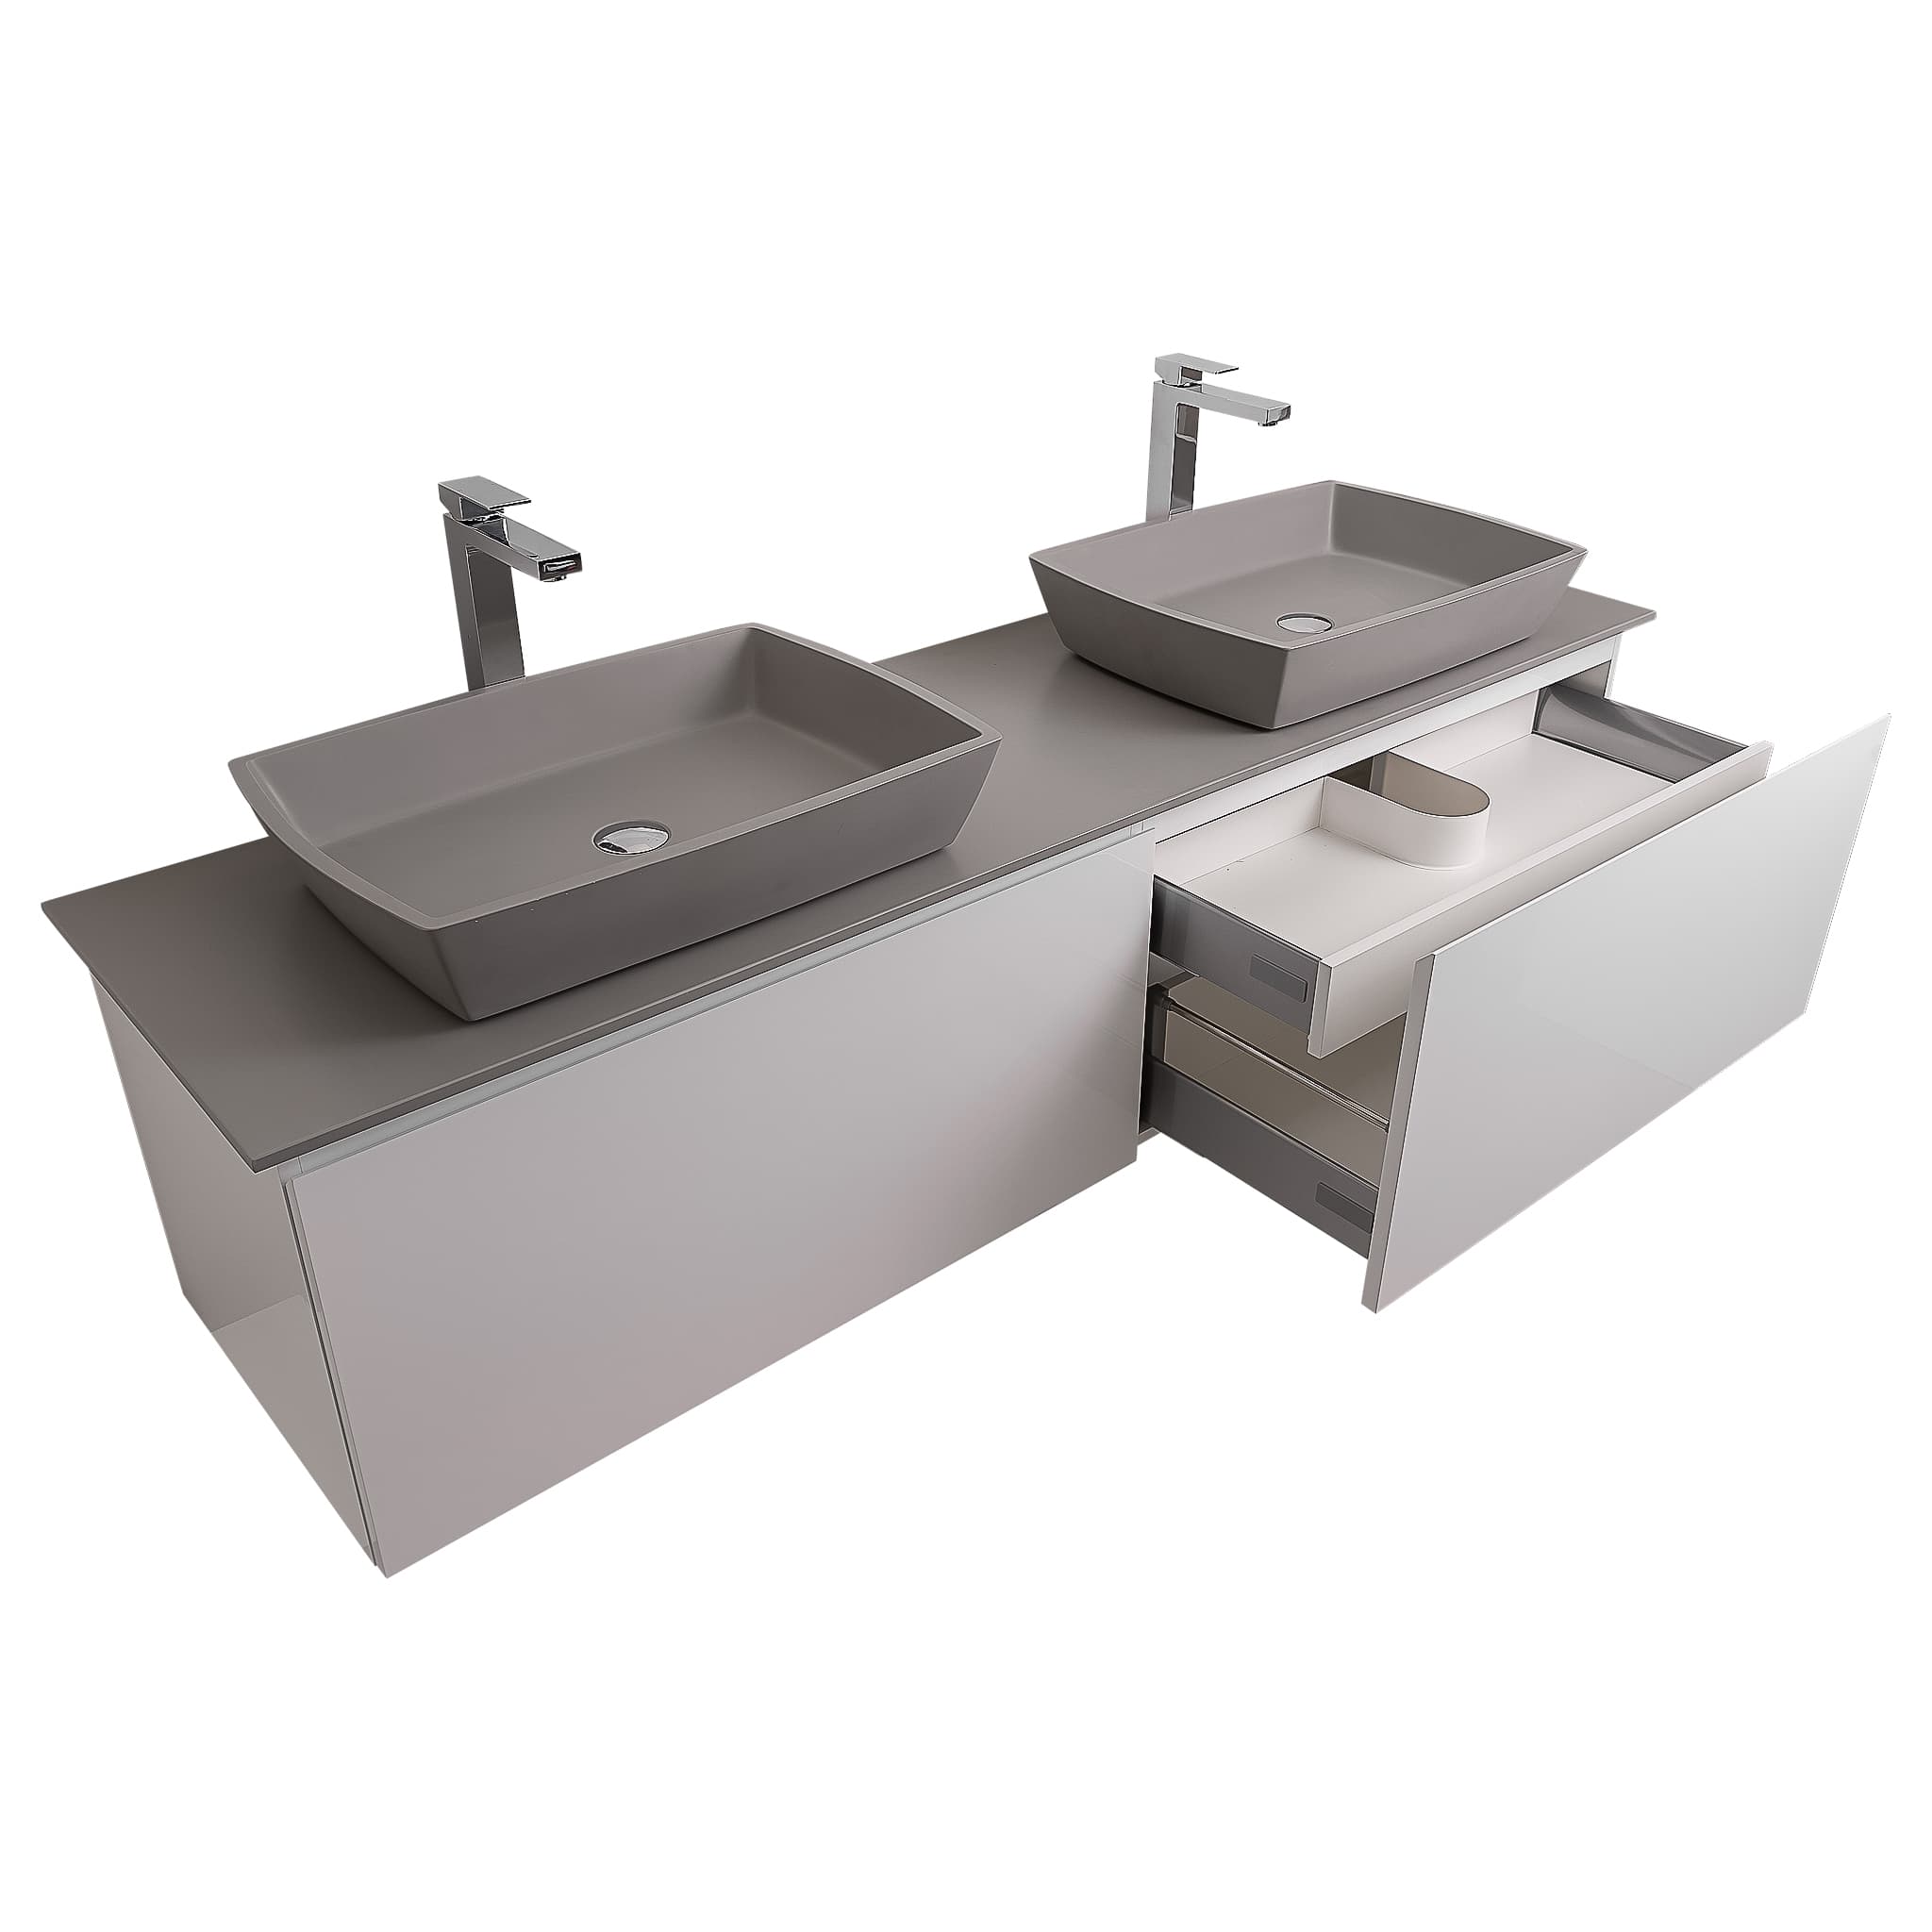 Venice 72 White High Gloss Cabinet, Solid Surface Flat Grey Counter And Two Square Solid Surface Grey Basin 1316, Wall Mounted Modern Vanity Set